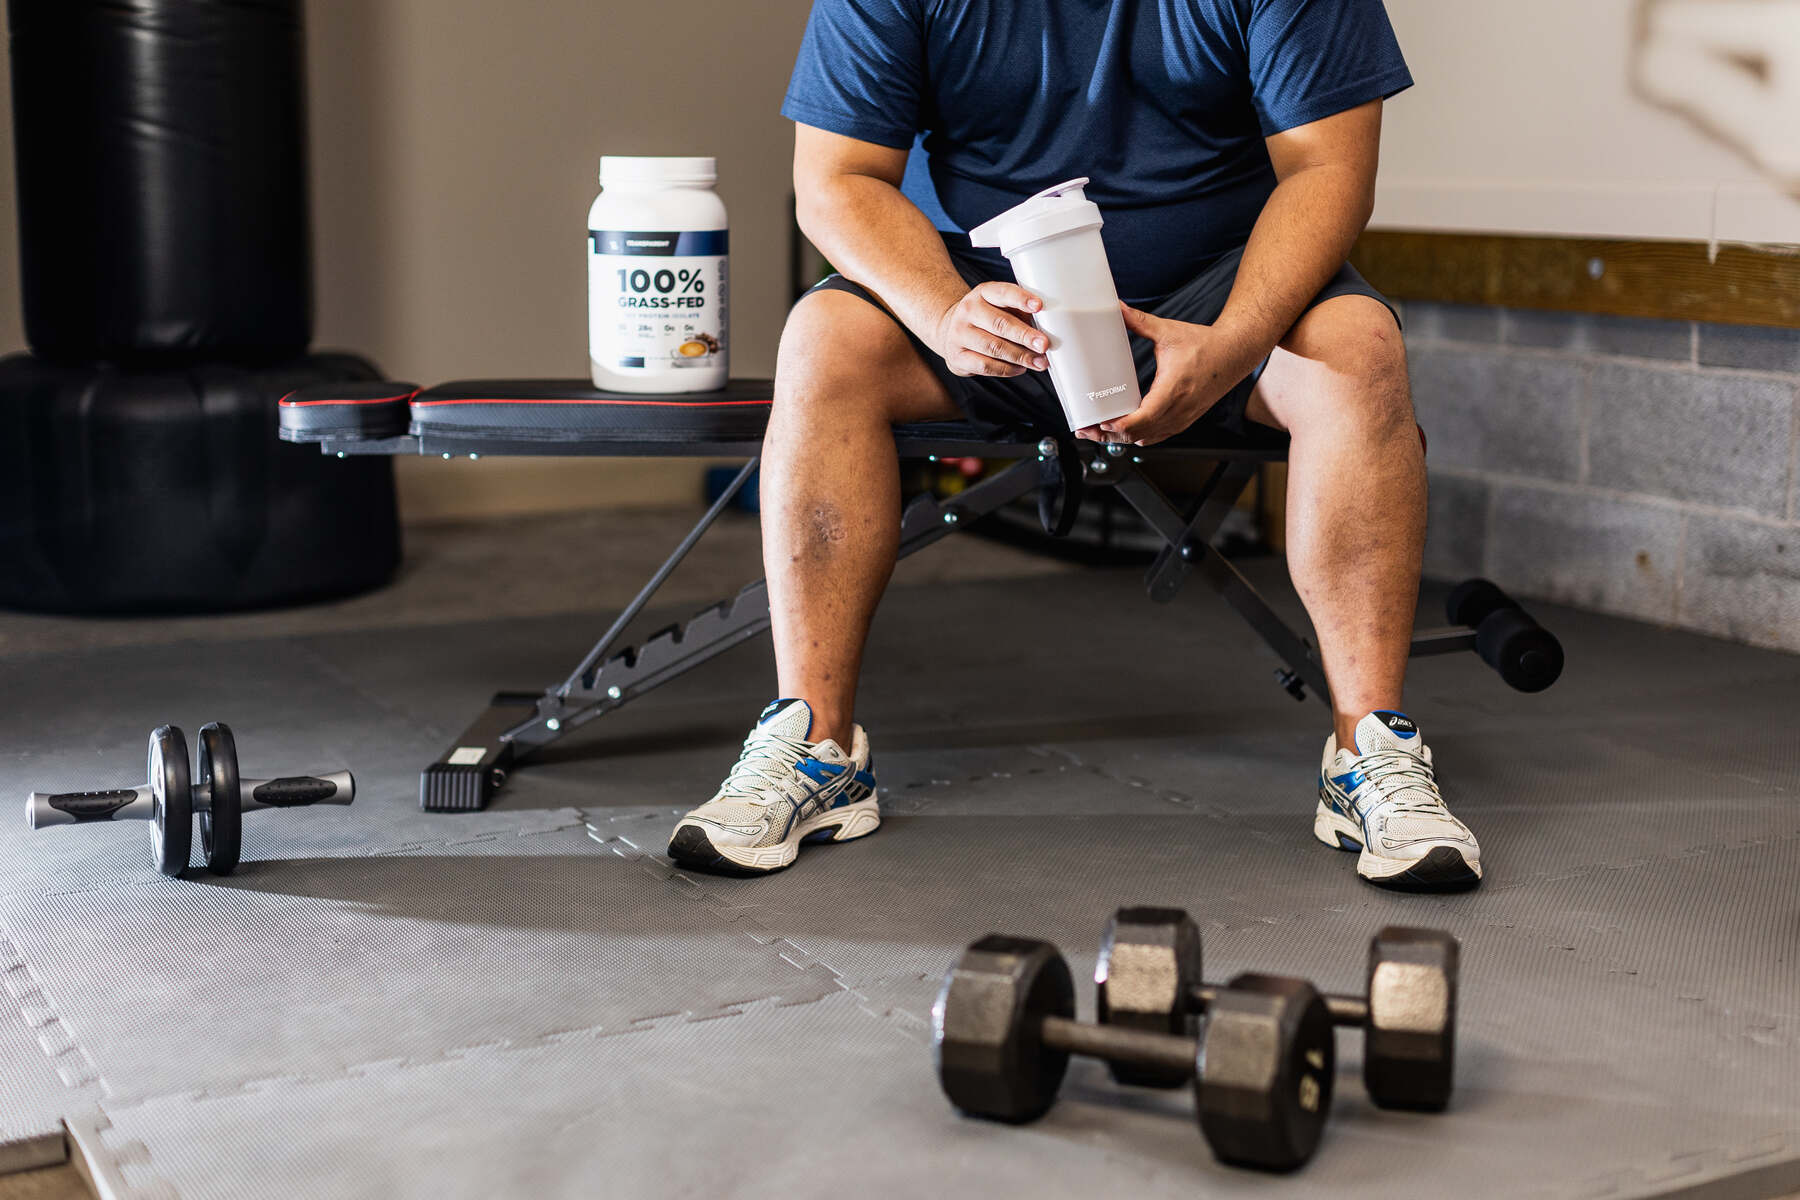 Man holding a protein powder drink while sitting on a workout bench in his garage gym